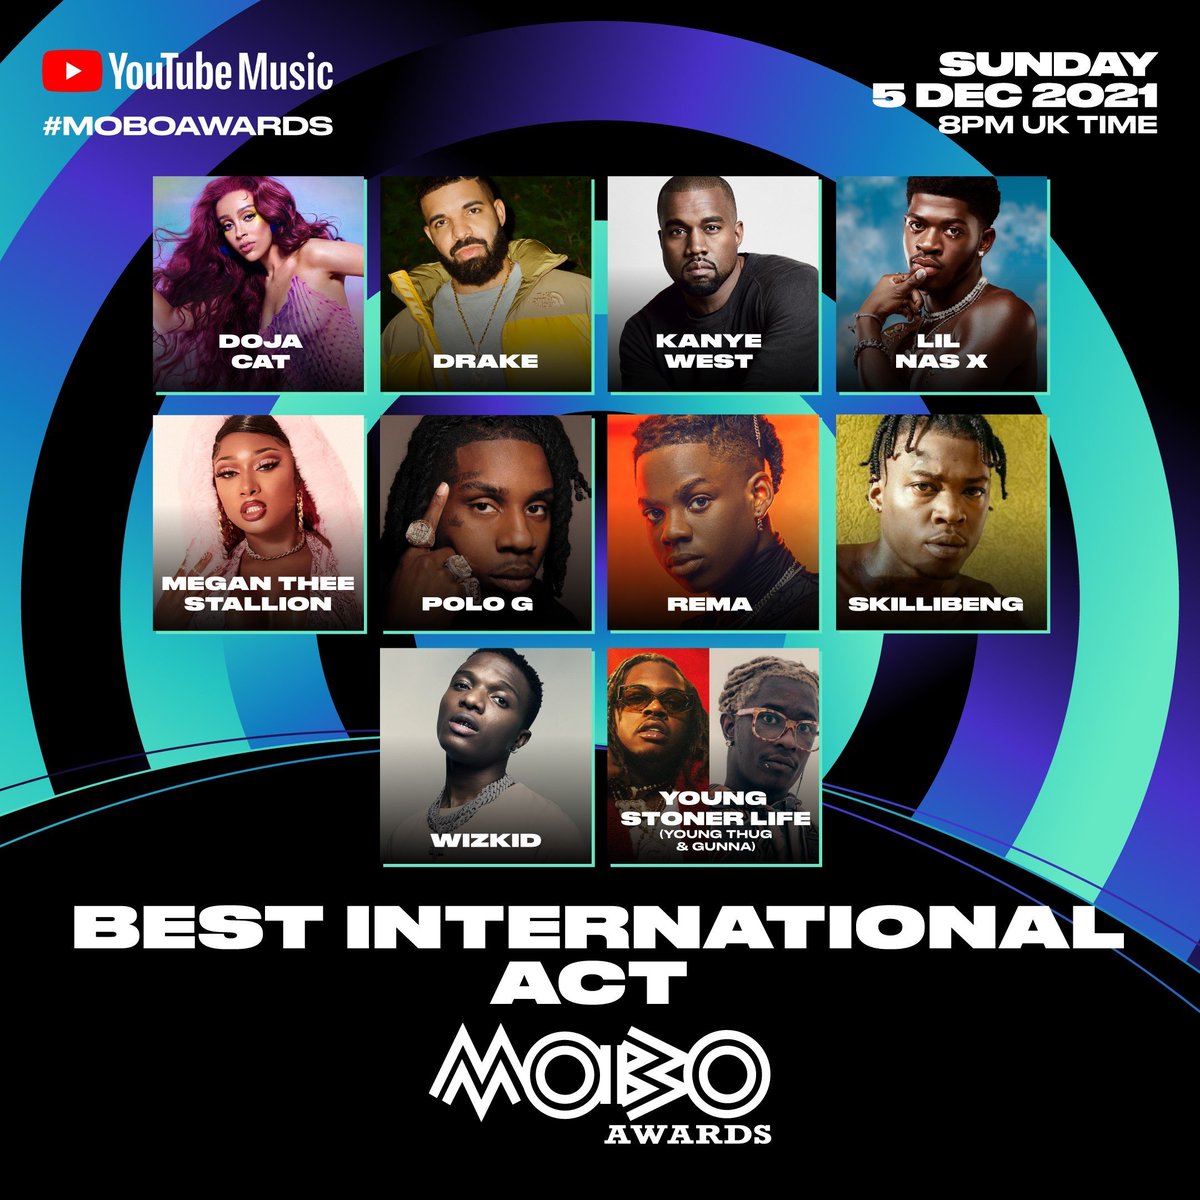 Wizkid beat Drake, Jay-Z, Travis Scott, Kendrick Lamar, Cardi B, Sza, DJ Khaled, Migos and Solange to win the MOBO Best International Act Award in 2017. In 2021, he defeated Drake, Kanye West, Lil Nas X, Doja Cat, Megan Thee Stallion and Polo G to win the global award again. He